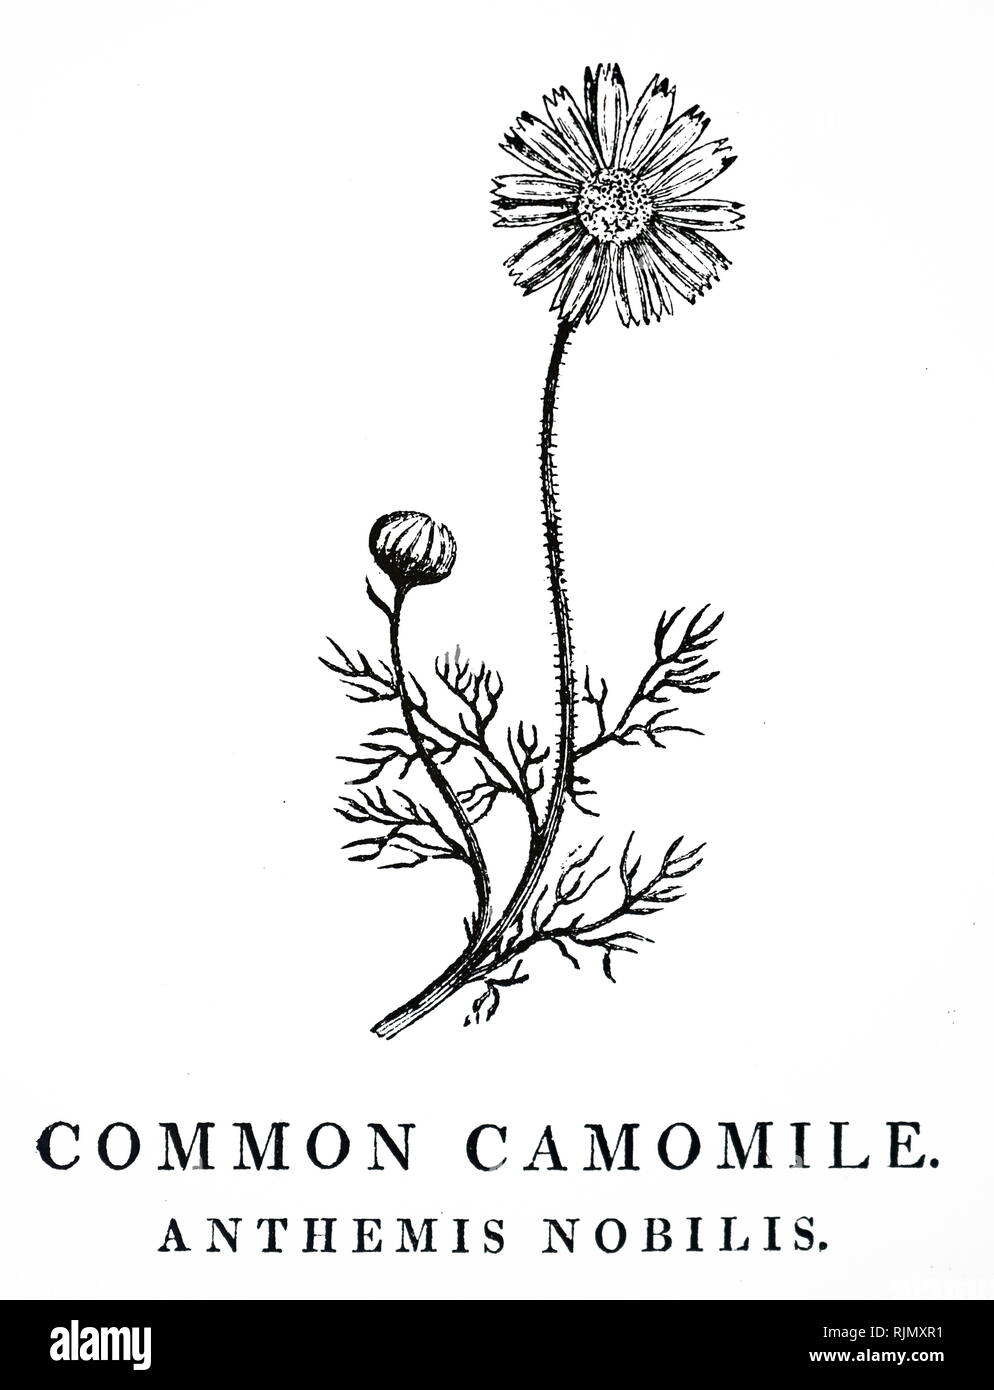 An engraving depicting Common Camomile. From Robert John Thornton, A New Family Herbai, London, 1810, with An engravings by Thomas Bewick Stock Photo